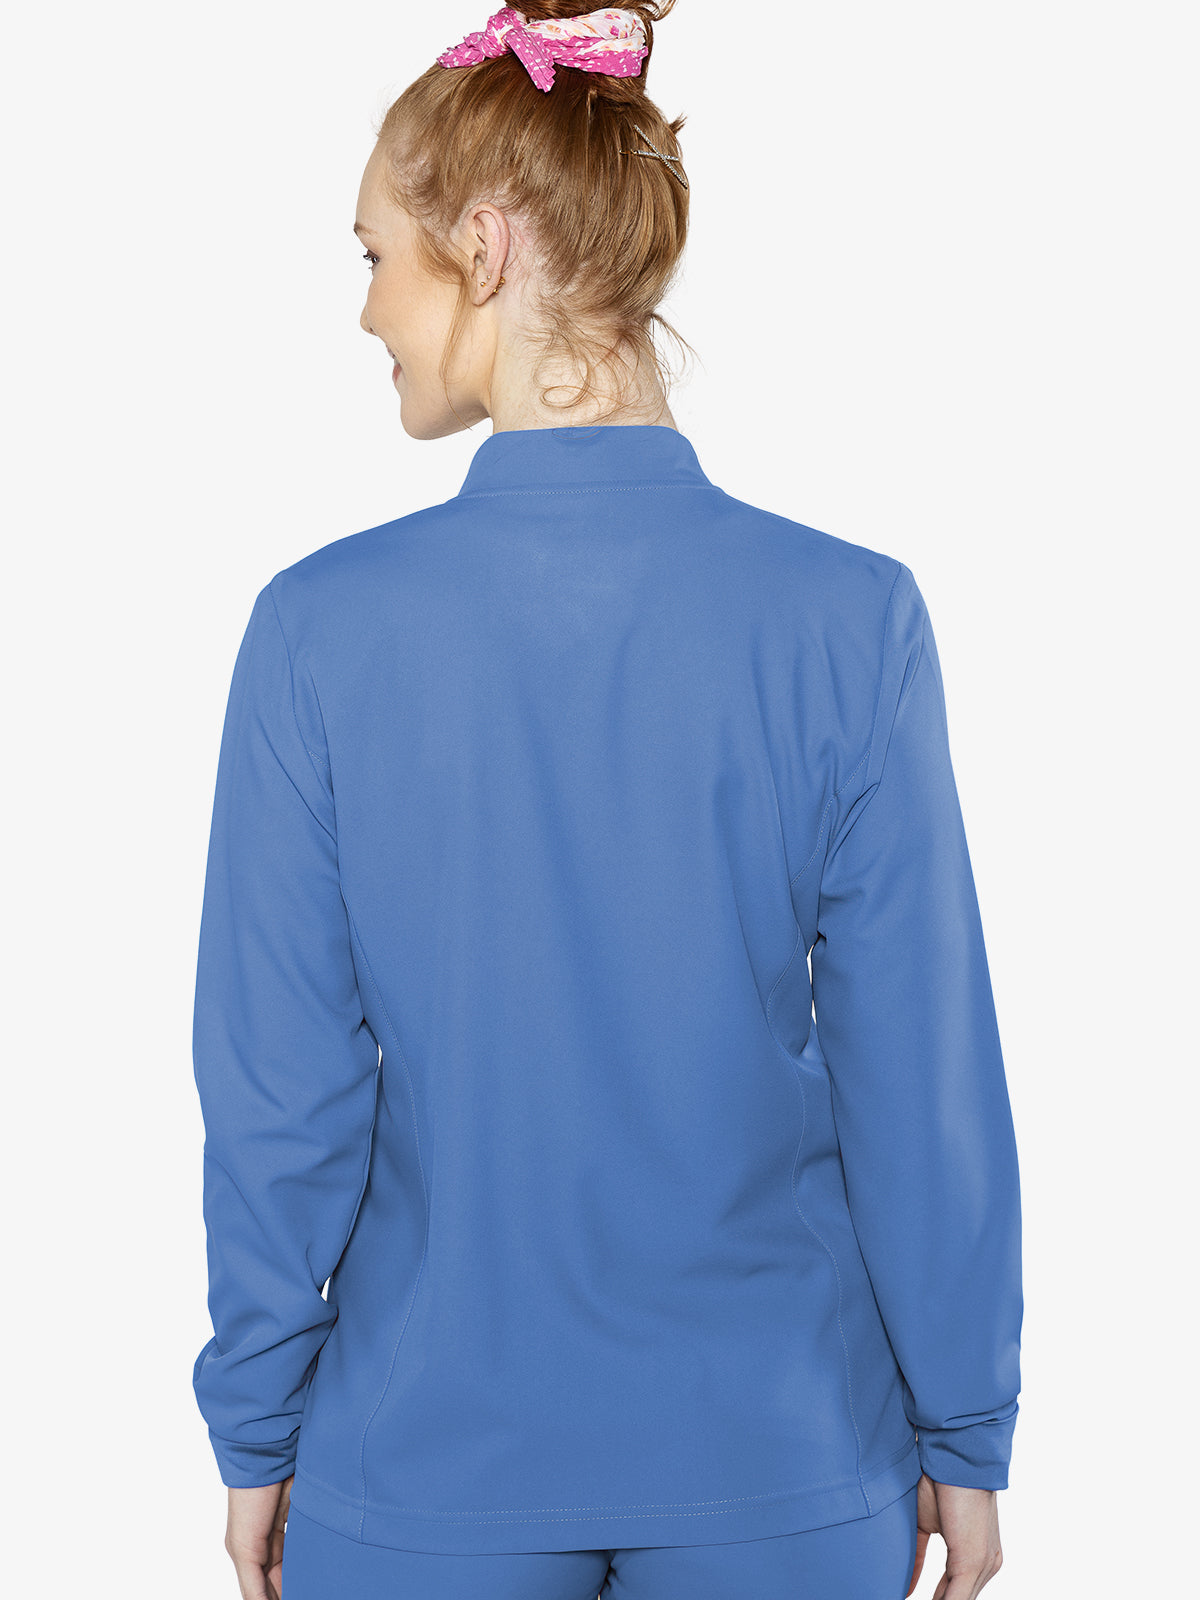 2660 Zip Front Warm-Up With Shoulder Yokes